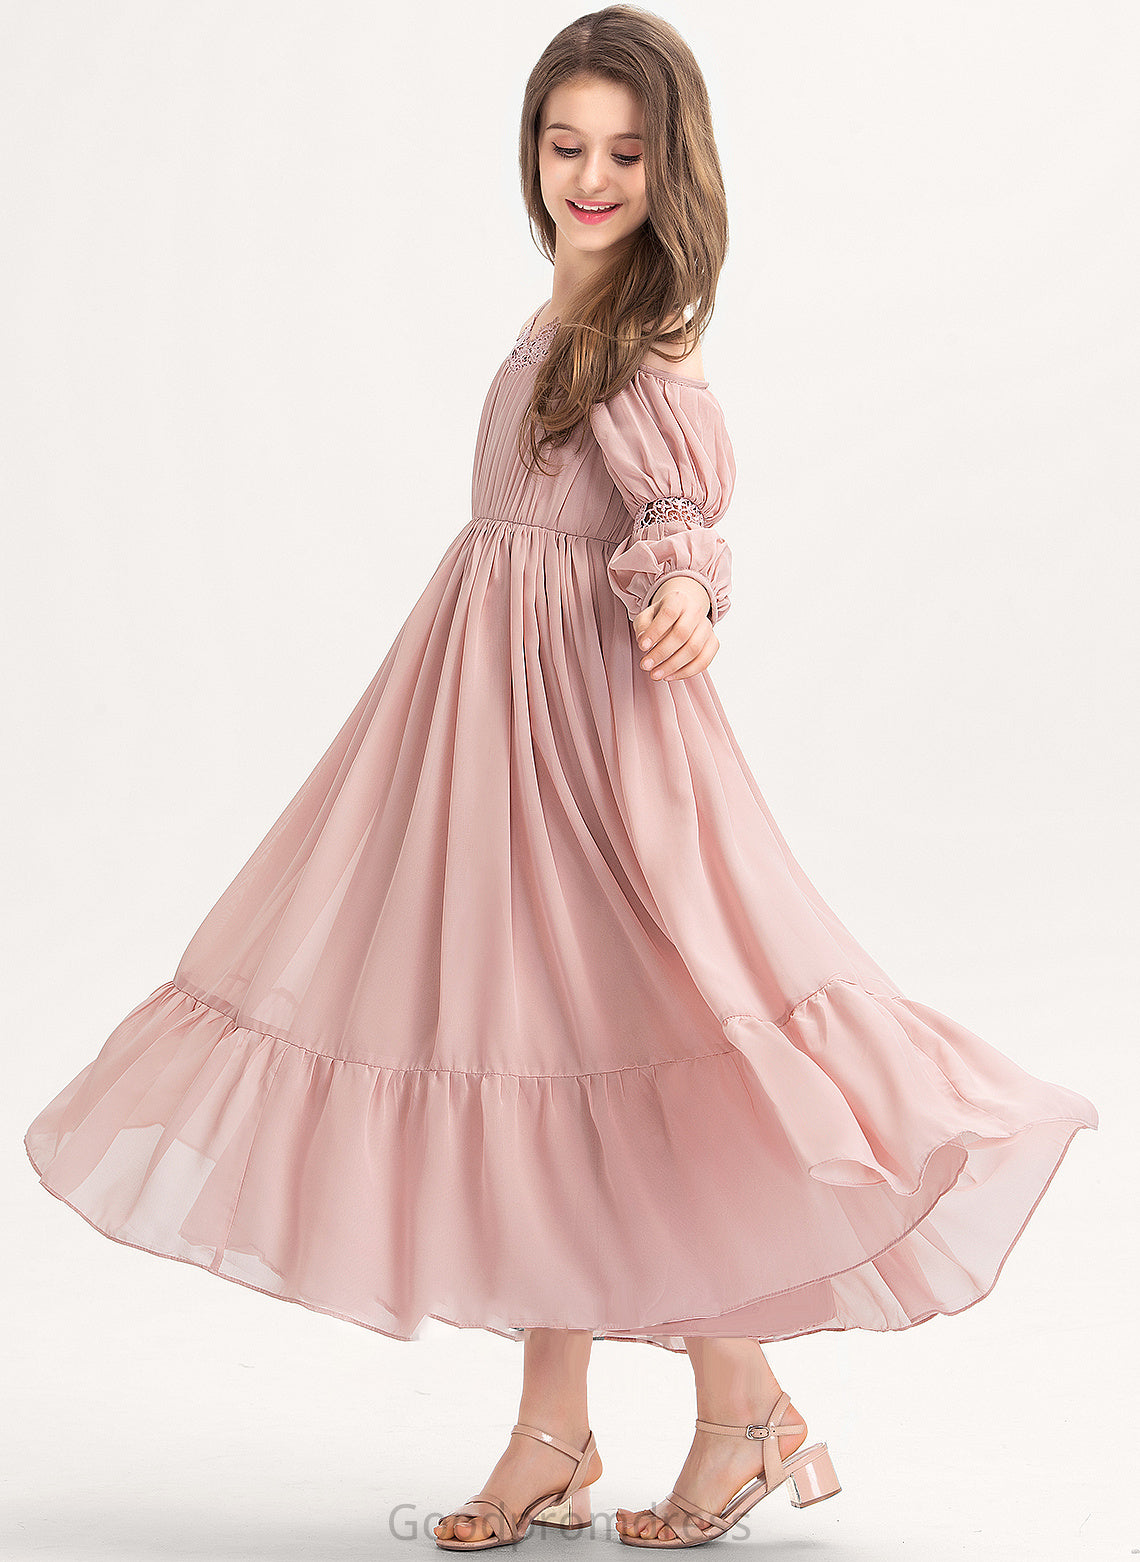 Neckline Lace Ankle-Length Square With Chiffon Ruffle A-Line Junior Bridesmaid Dresses Nina